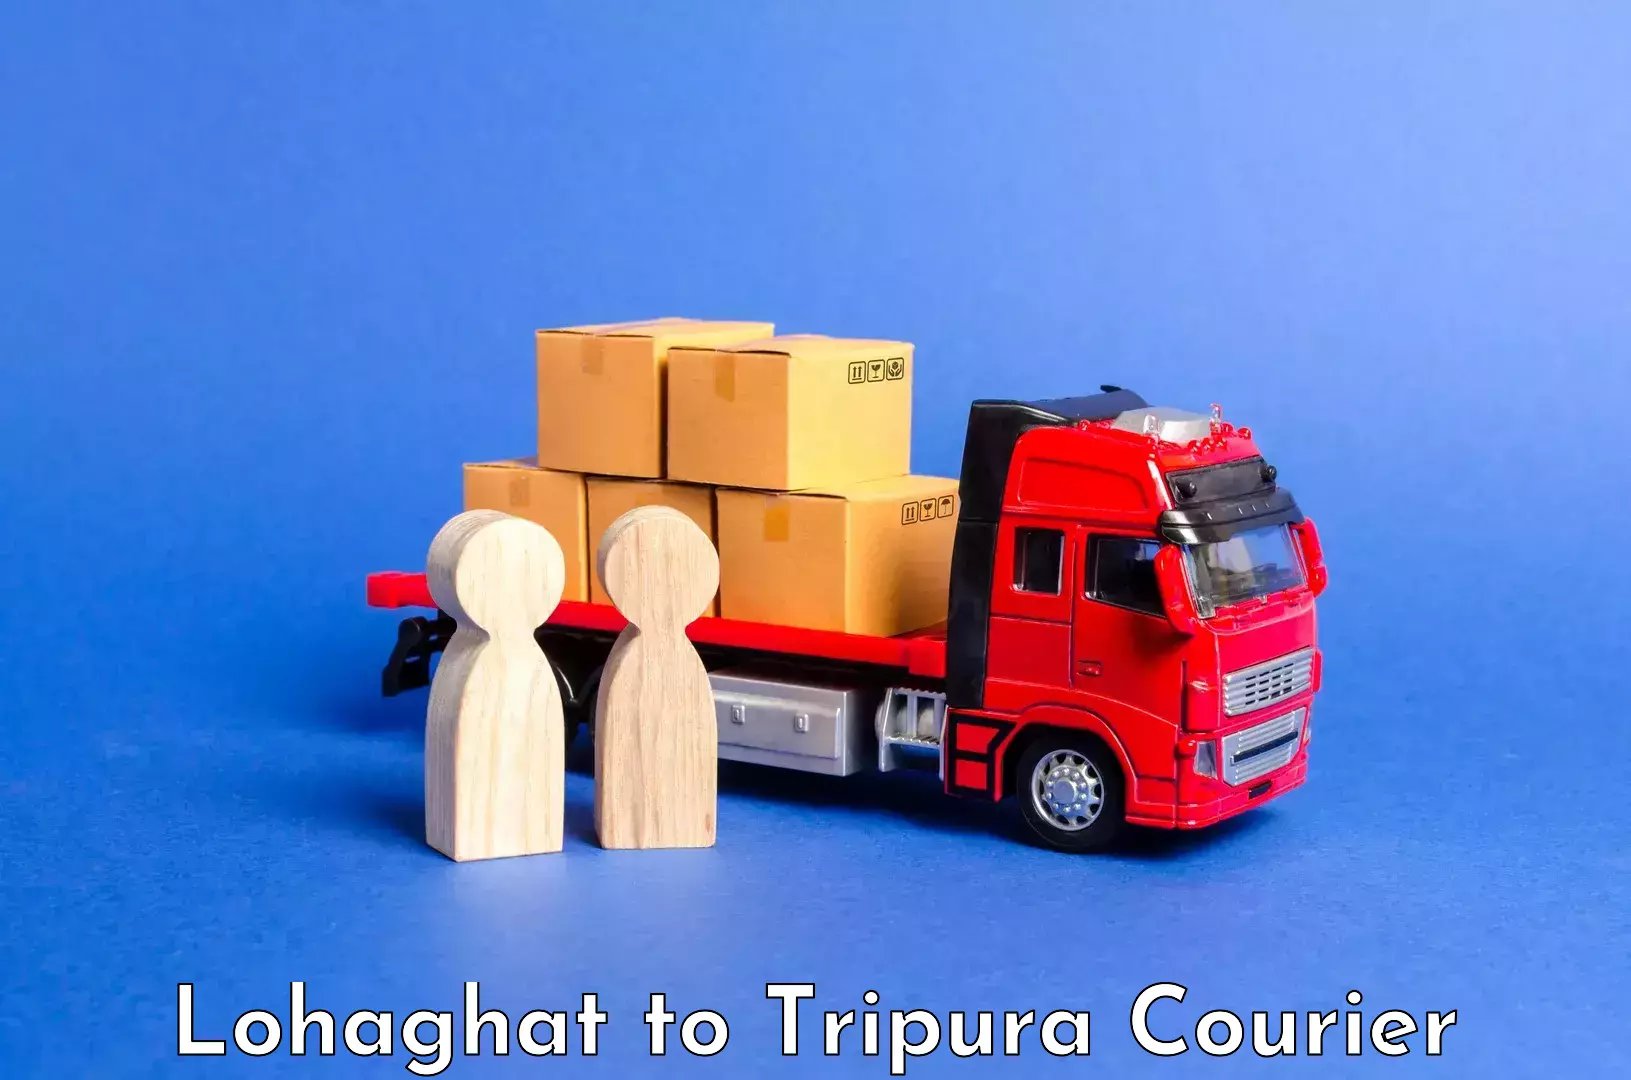 Overnight luggage courier Lohaghat to Udaipur Tripura